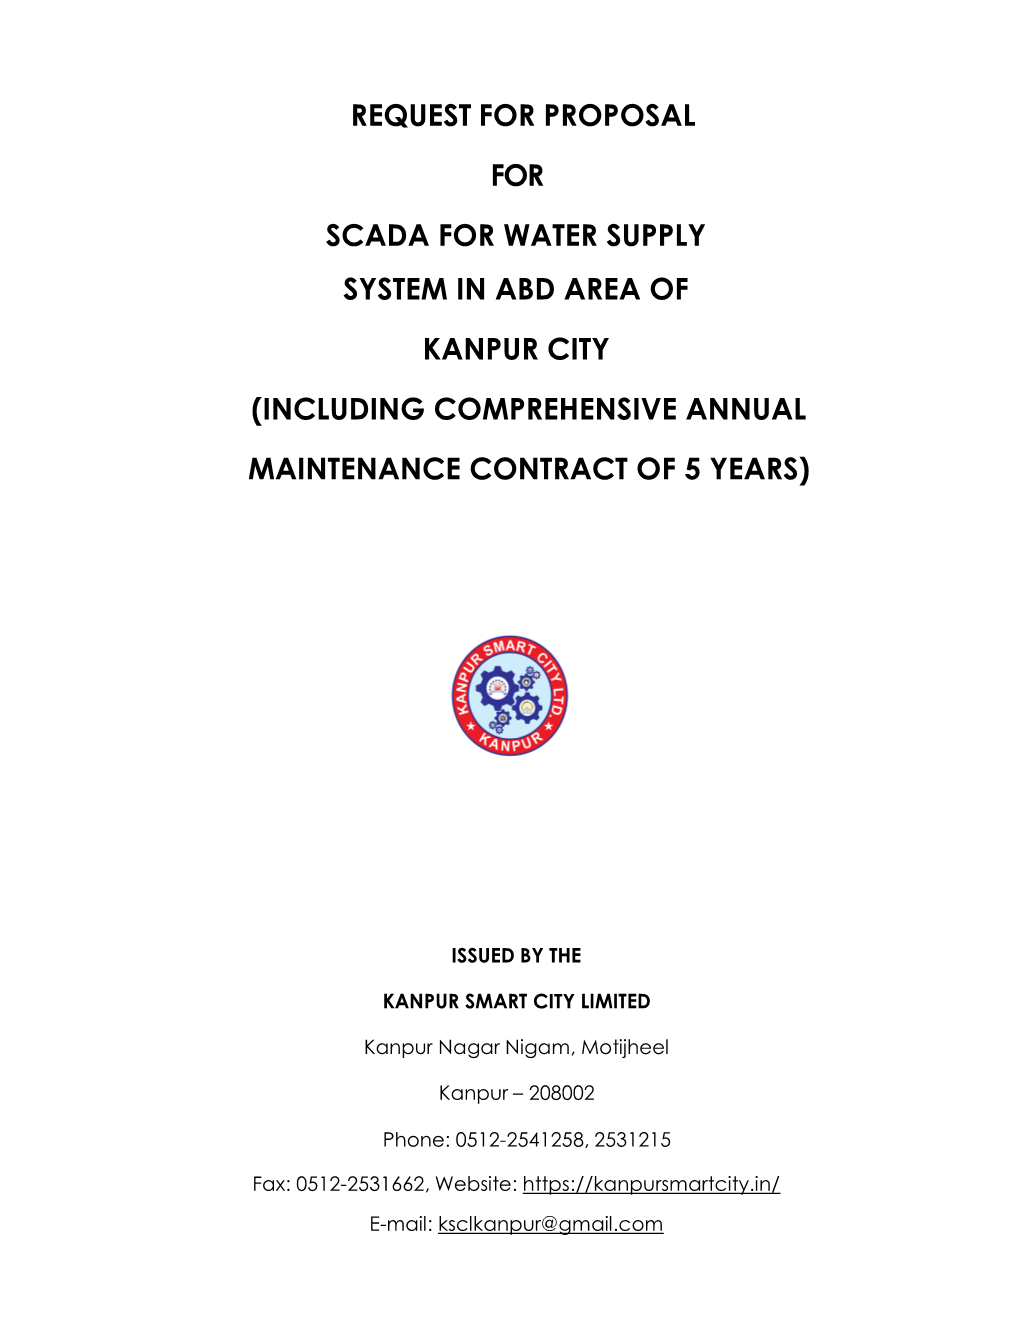 Request for Proposal for Scada For